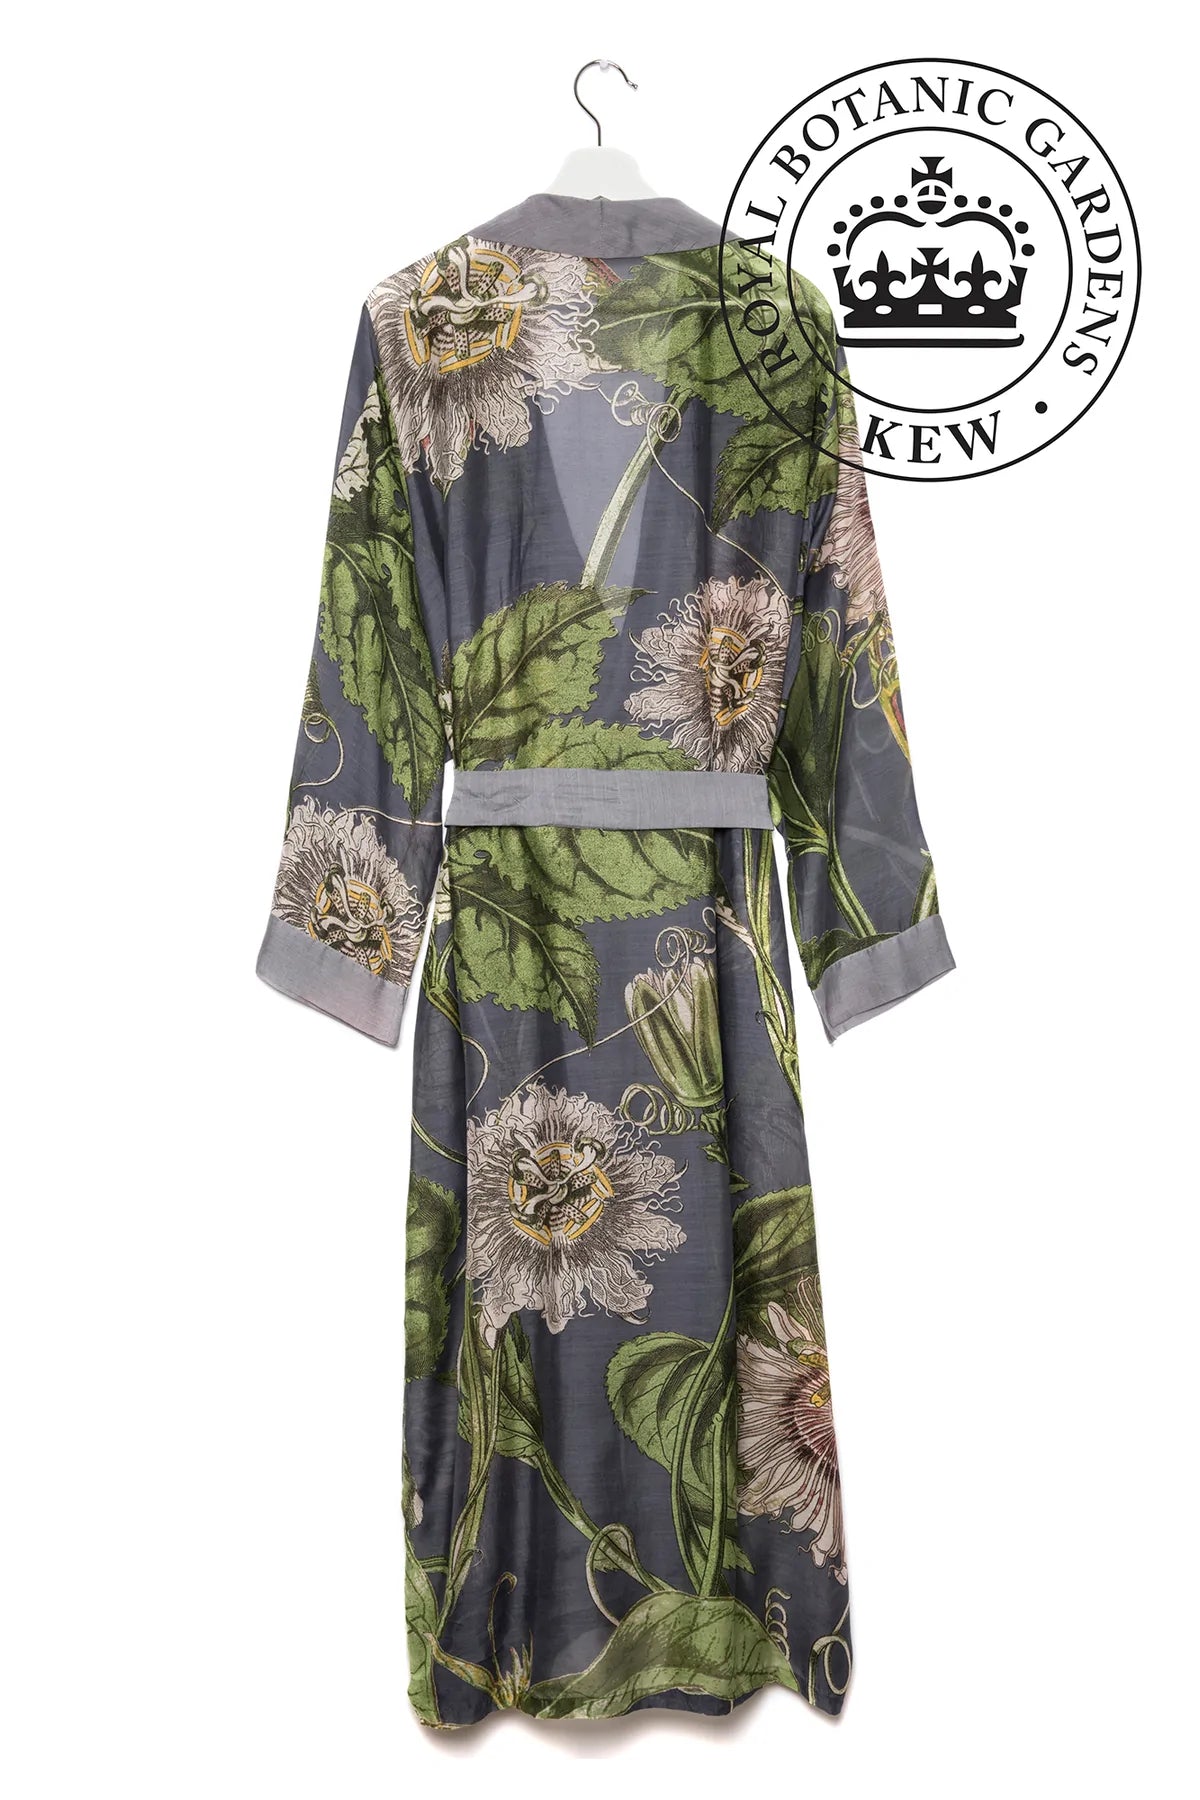 Grey dressing robe with passion flower print in green pink sna dyello with pockets and contrast grey cuffs tie belt and collar